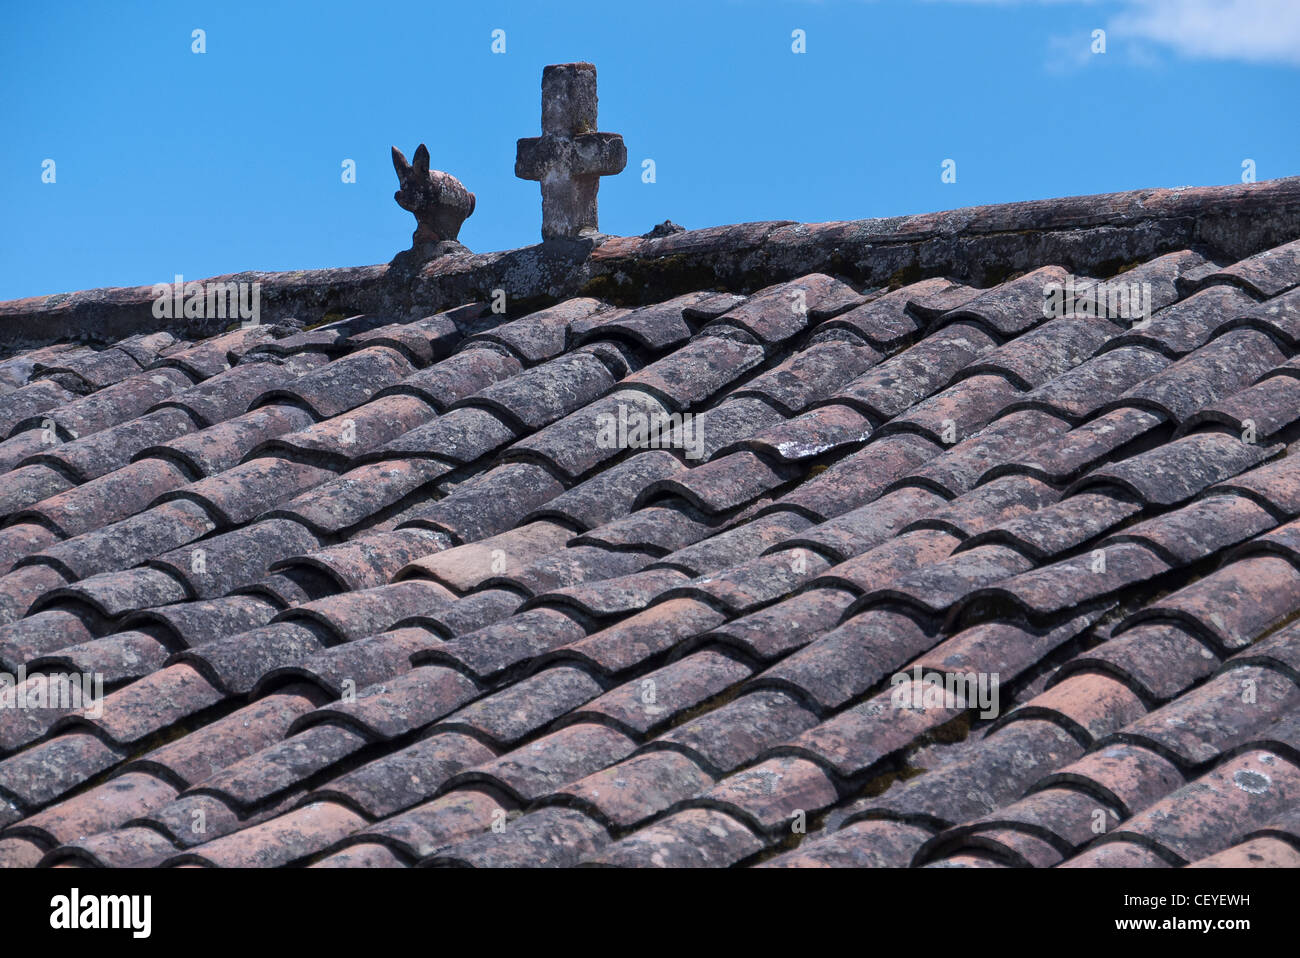 An old and weathered red ceramic tile roof detail of the Catholic church with stone cross and rabbit on the crest of the roof. Stock Photo